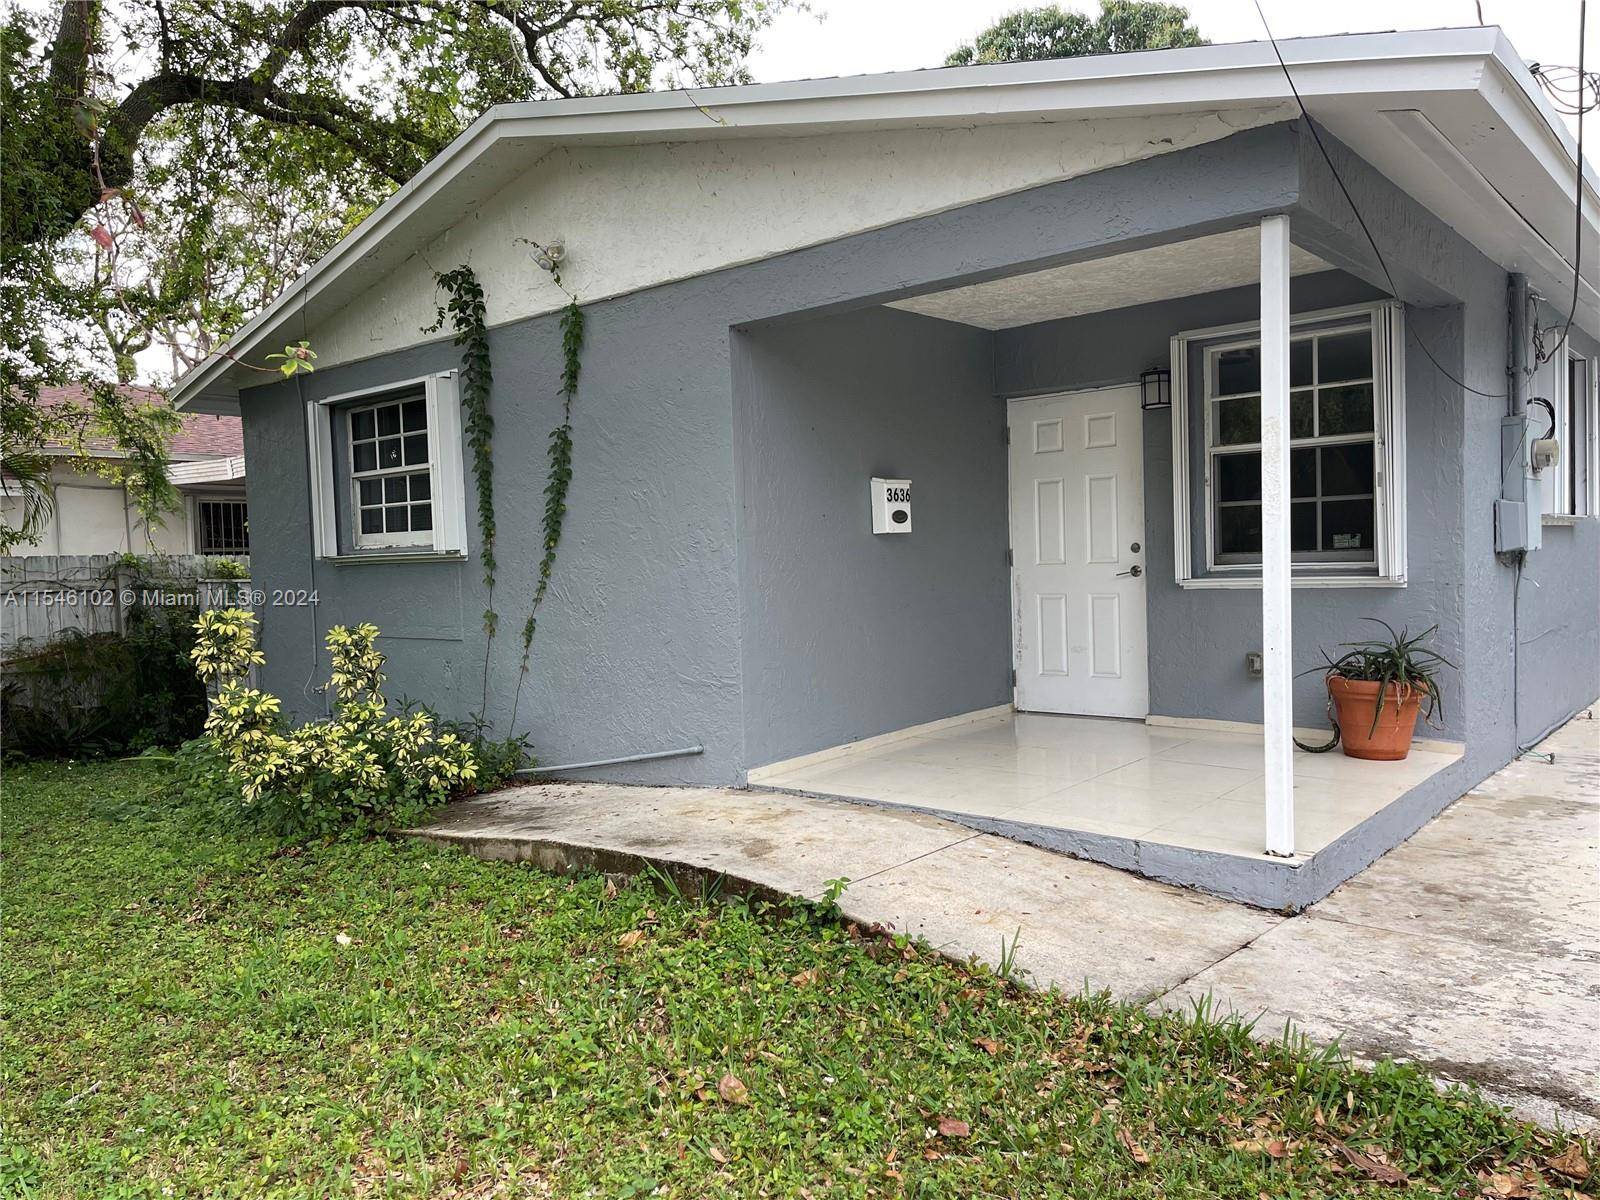 Great Investment property 3 bedroom 2bath home in Coconut Grove features open spaces, kitchen with quartz counter tops and stainless steel appliances.